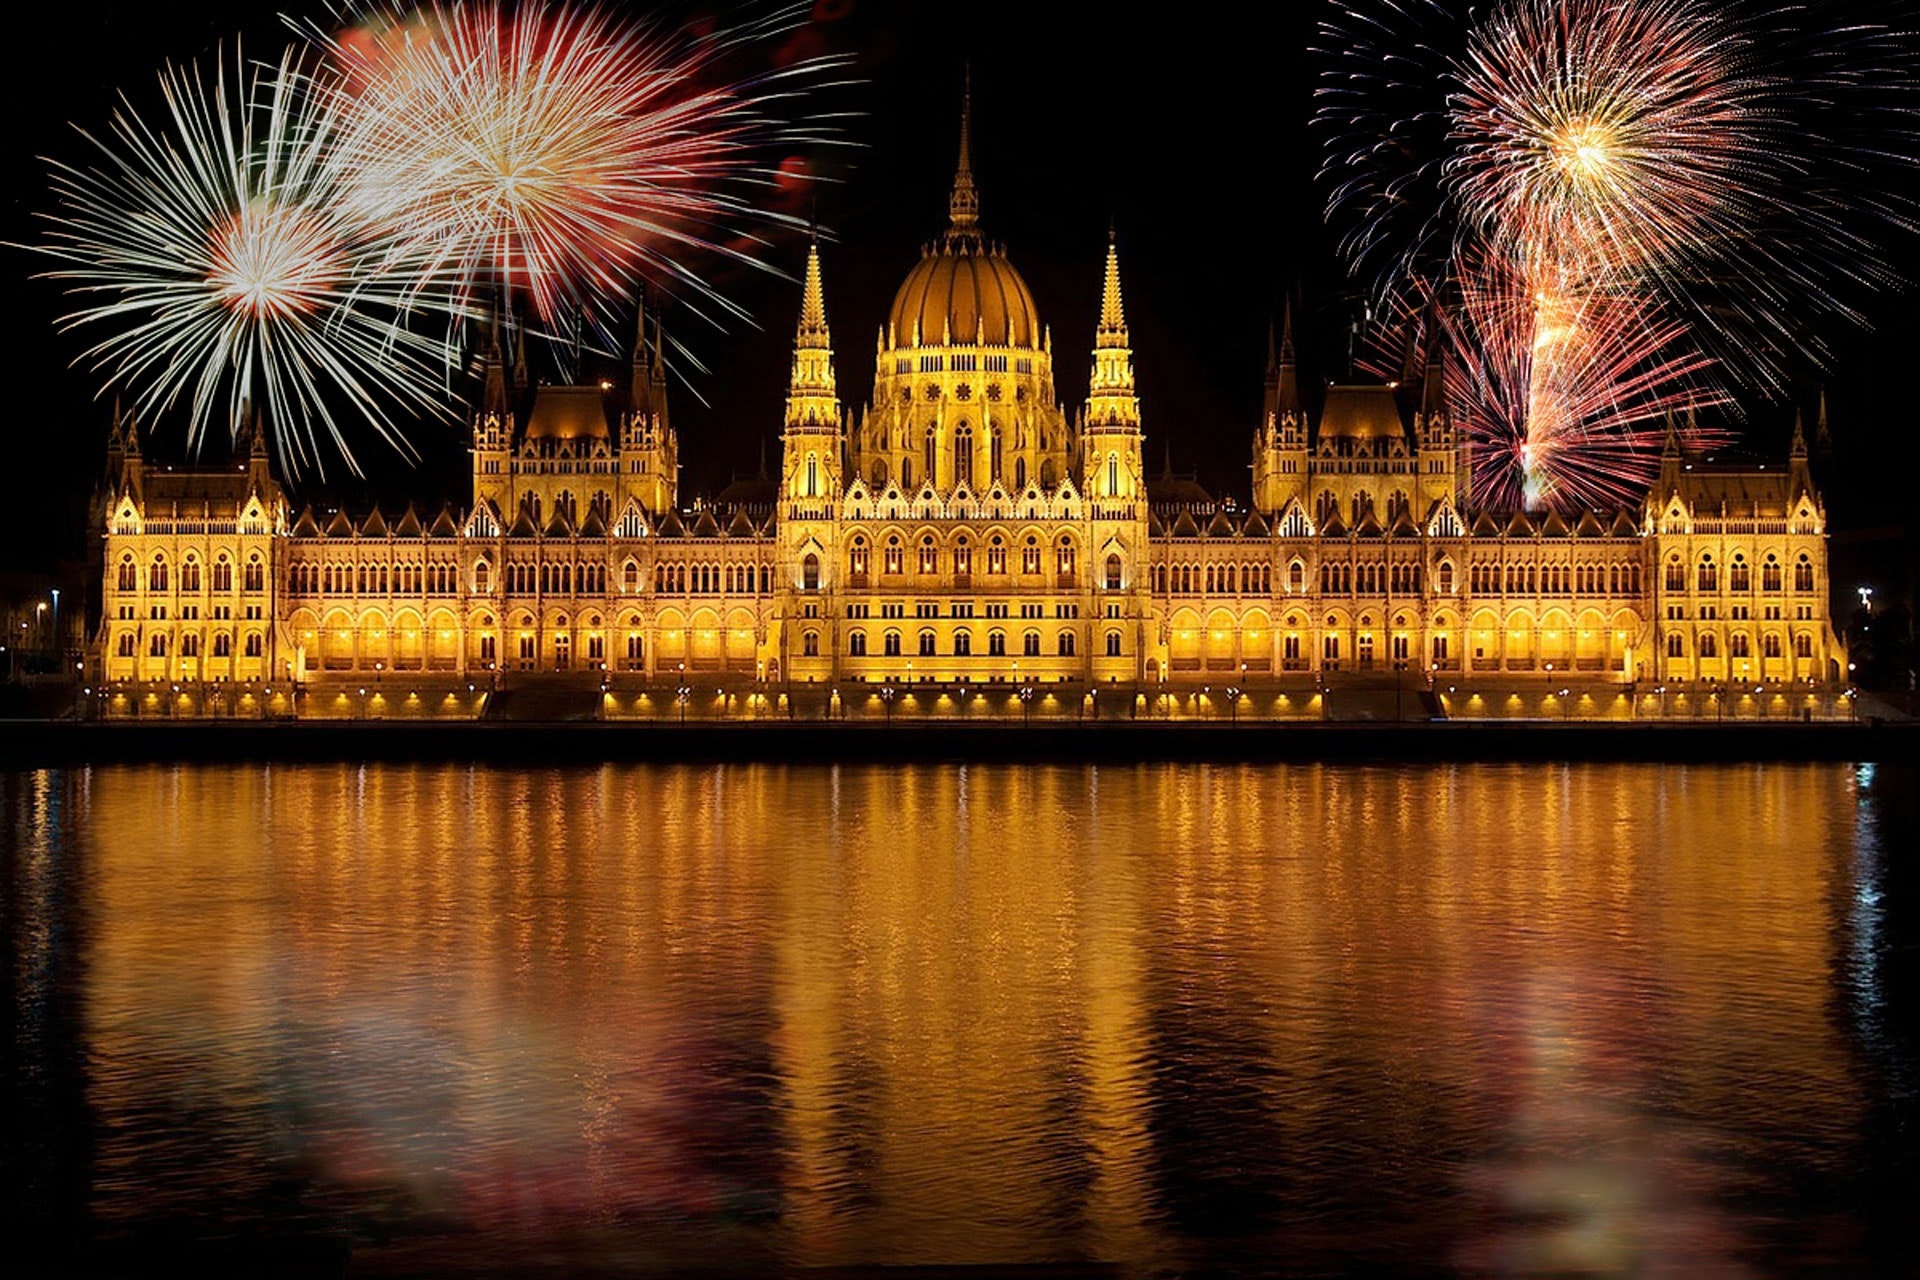 20. August: One of the biggest Budapest Public Holiday